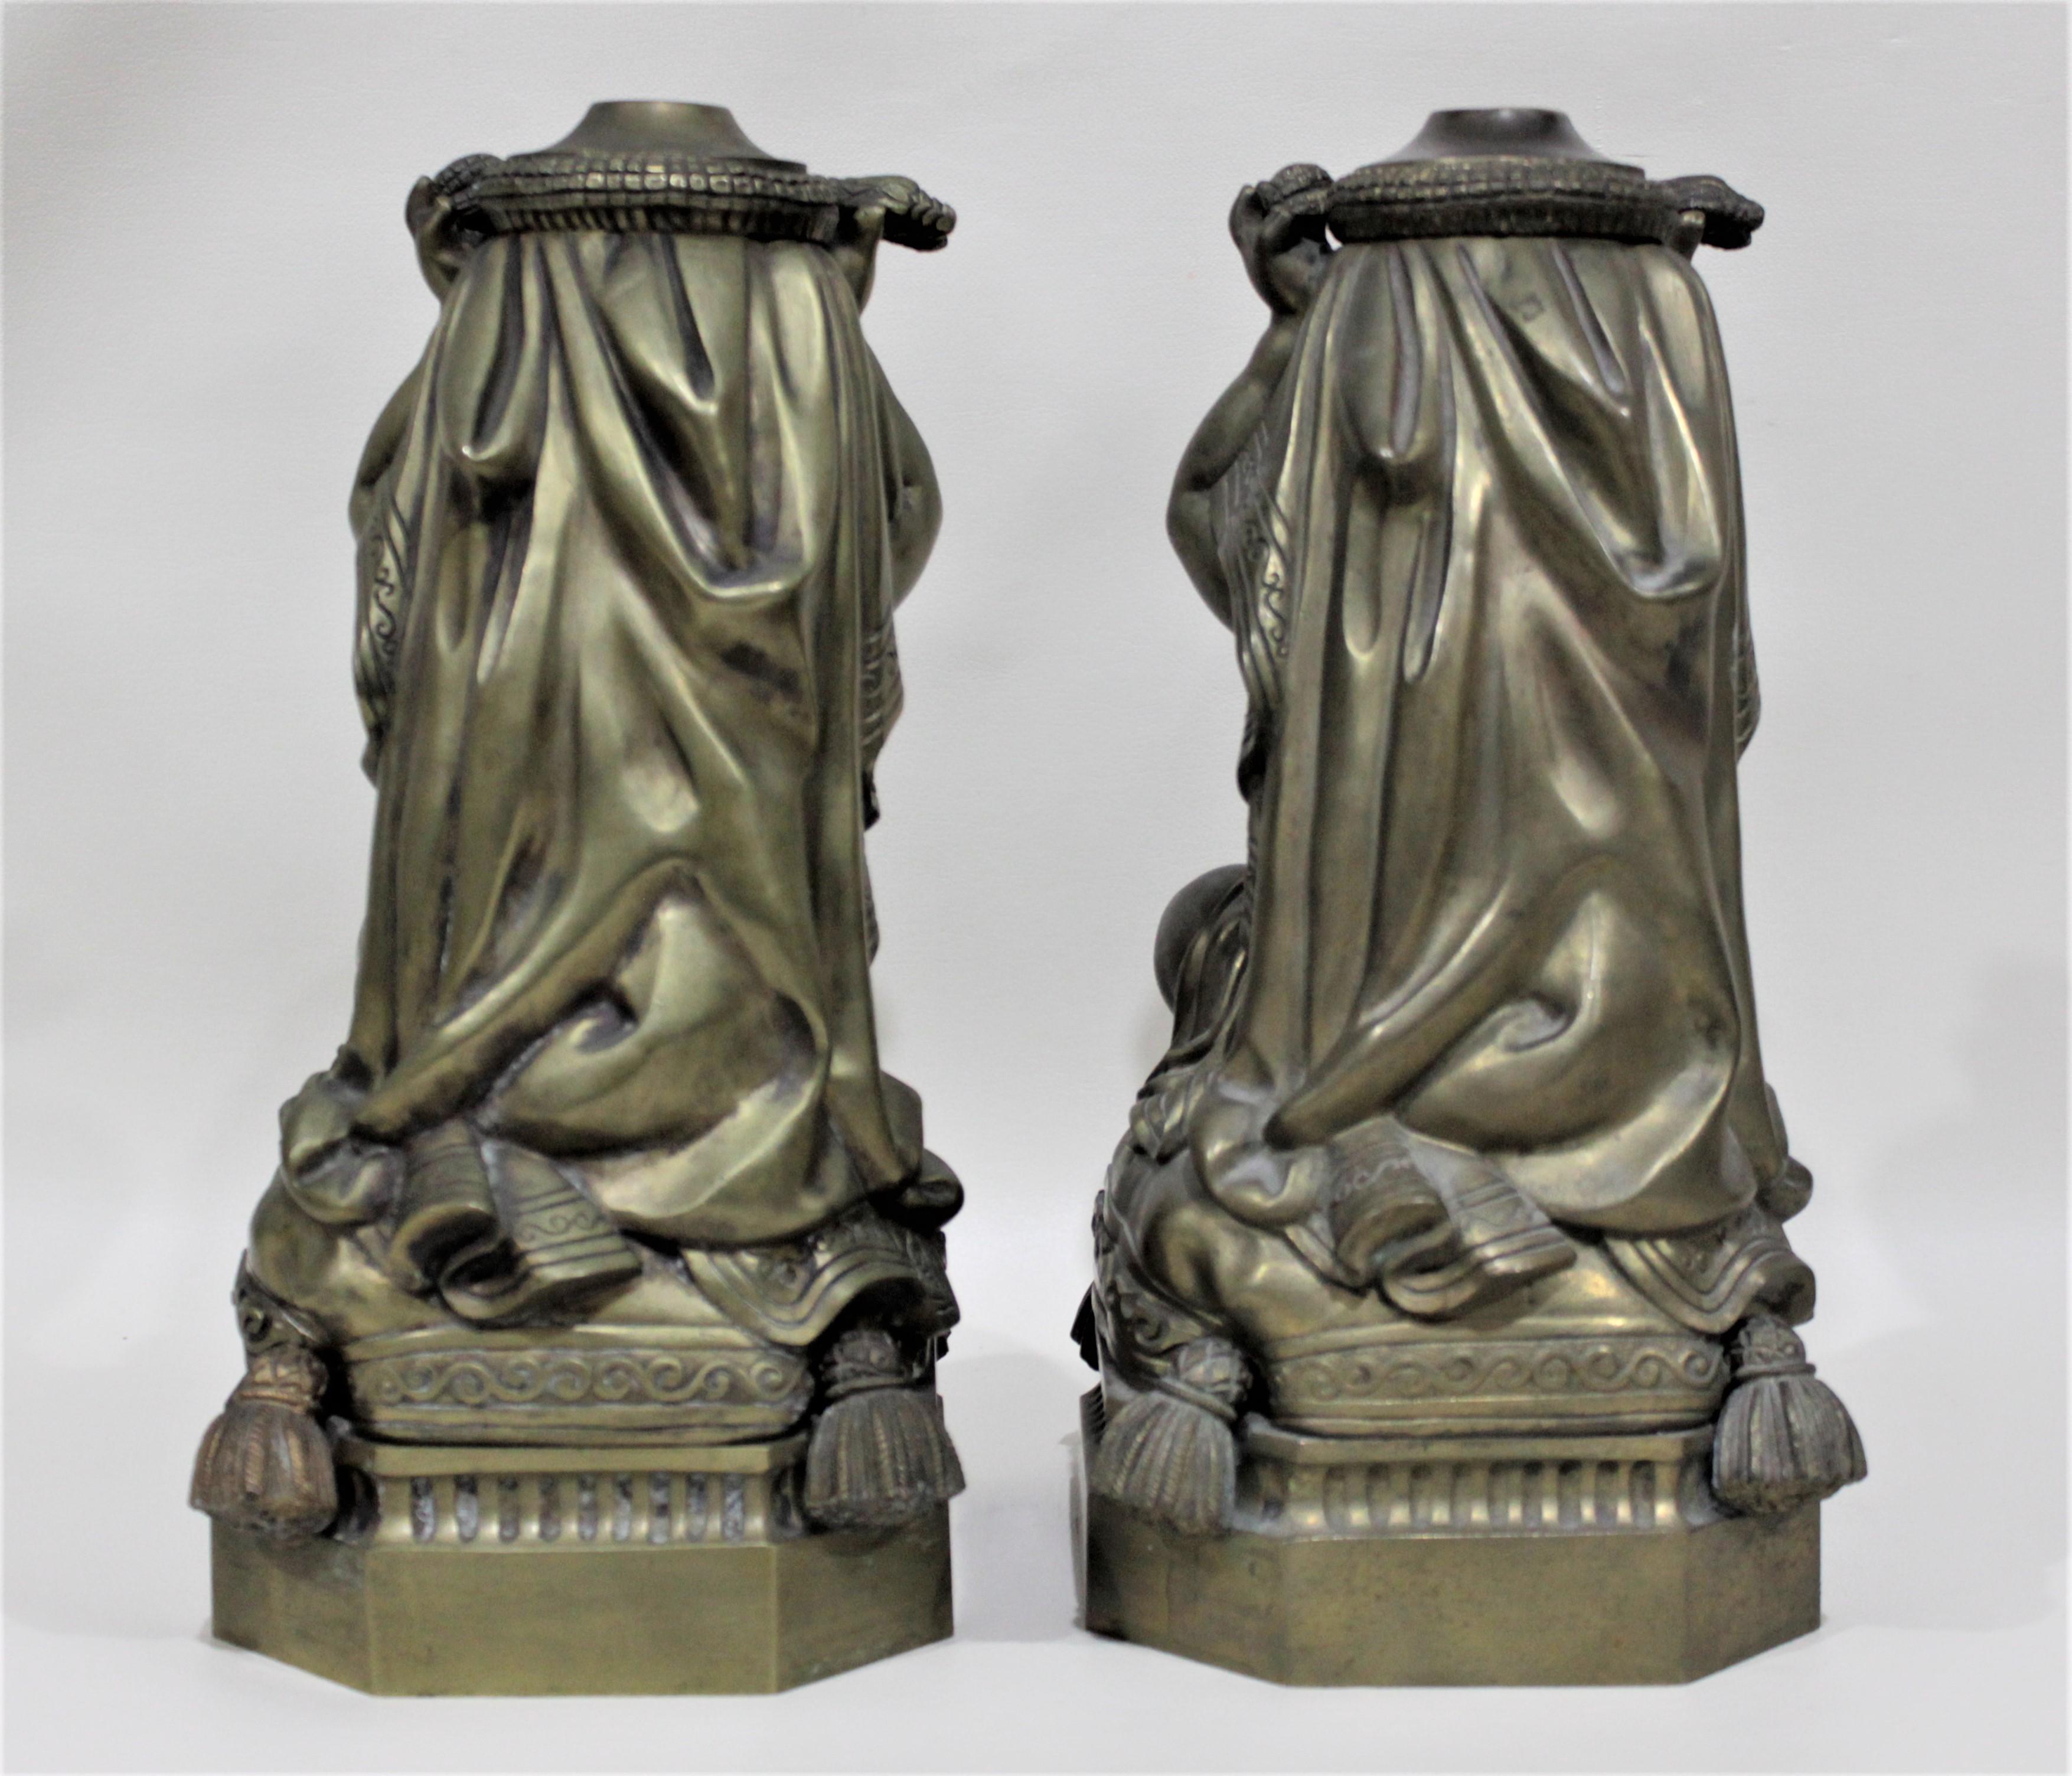 High Victorian Pair of Victorian Solid Cast Bronze Figural Cherub Oil Lamp Bases Holding Snakes For Sale